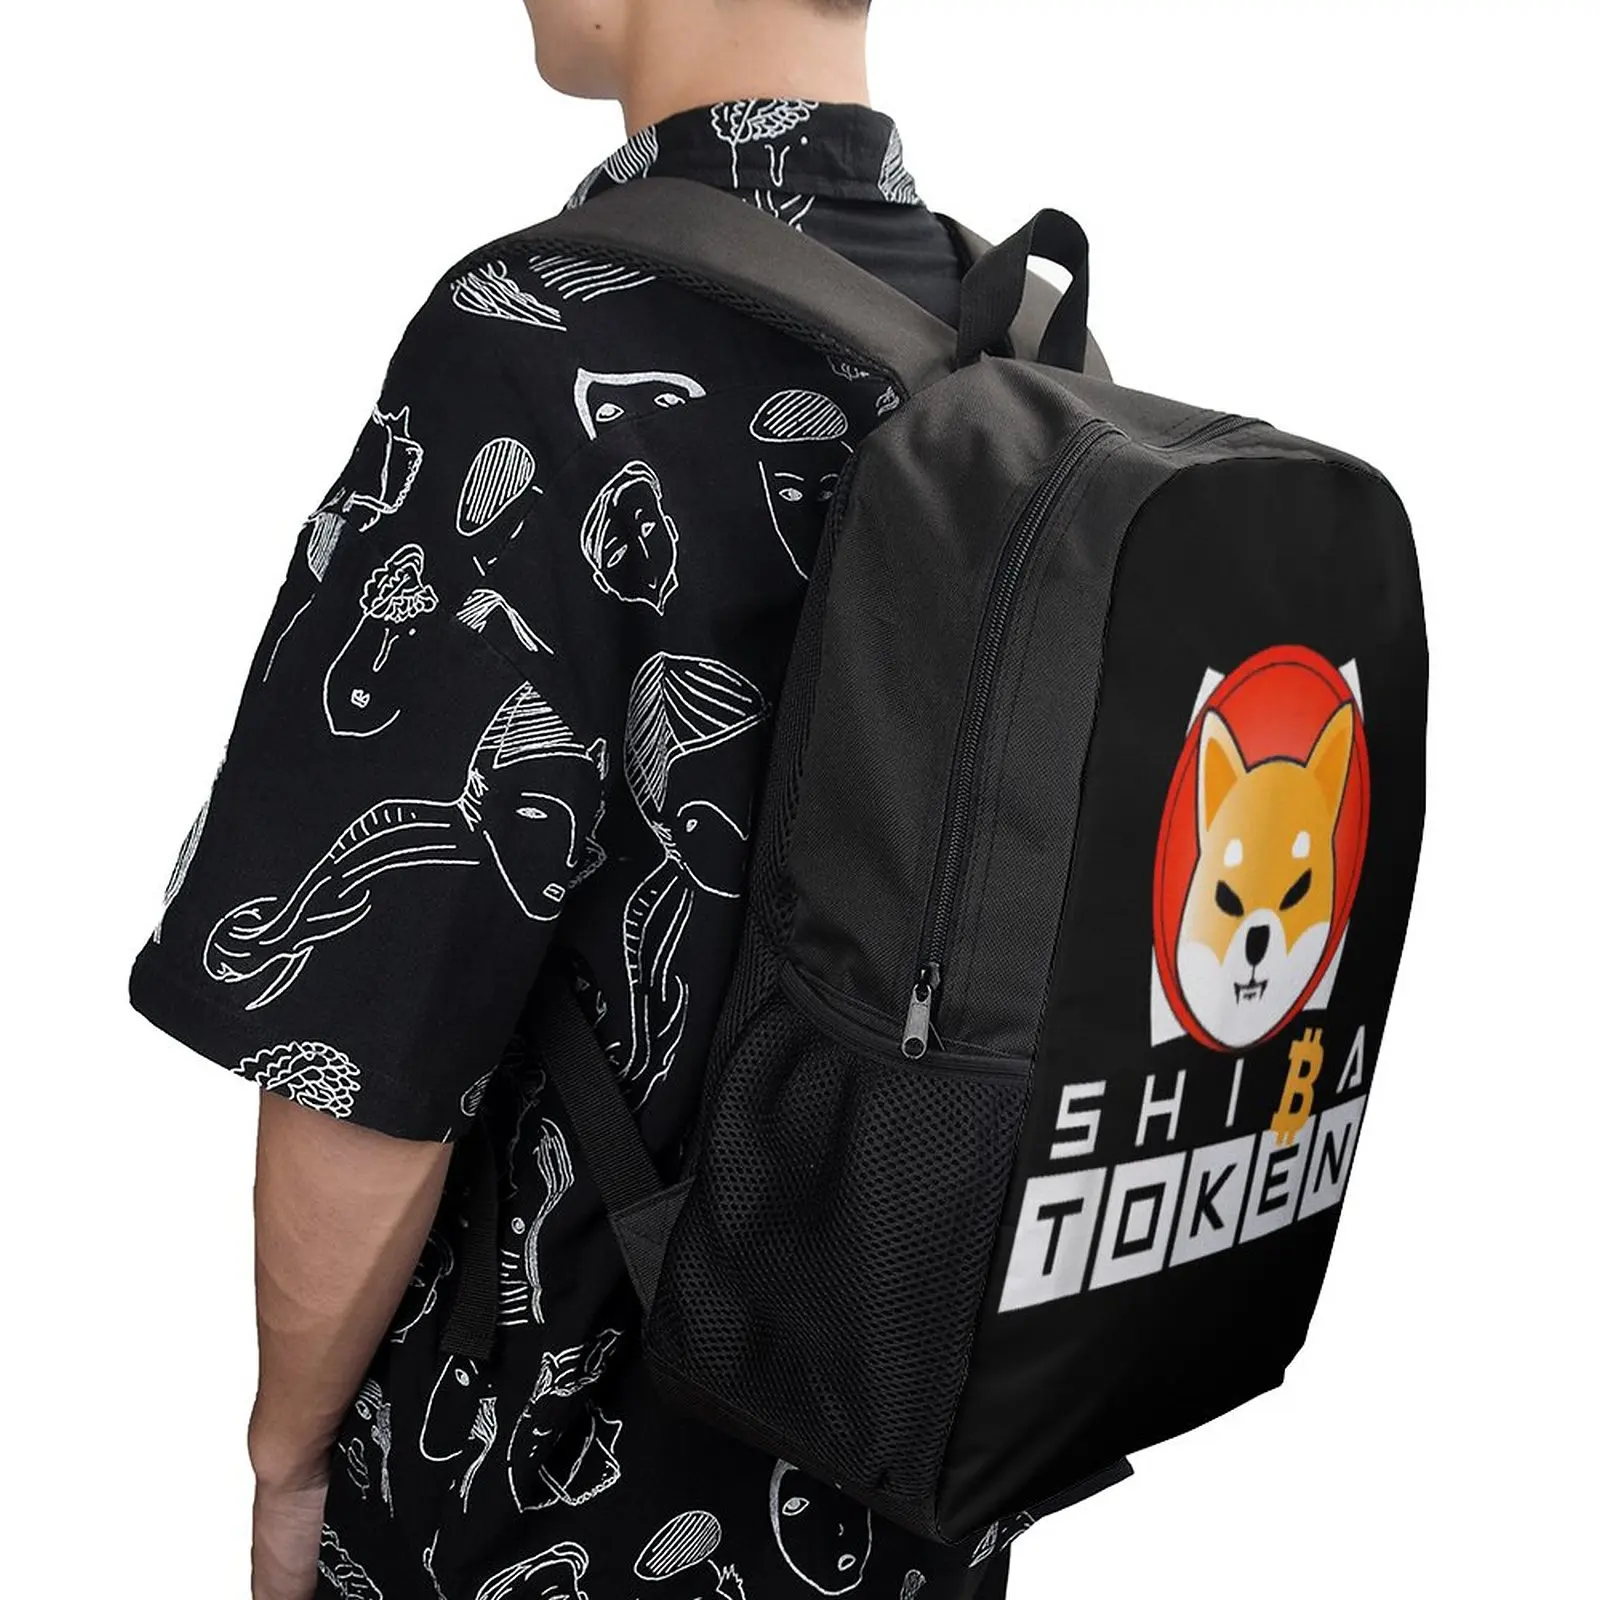 

17 Inch Shoulder Backpack Shiba Inu To The Moon Token Shib Coin Crypto Hodler Shiba Inu Token Crypto Coin Cryptocurrency Secure